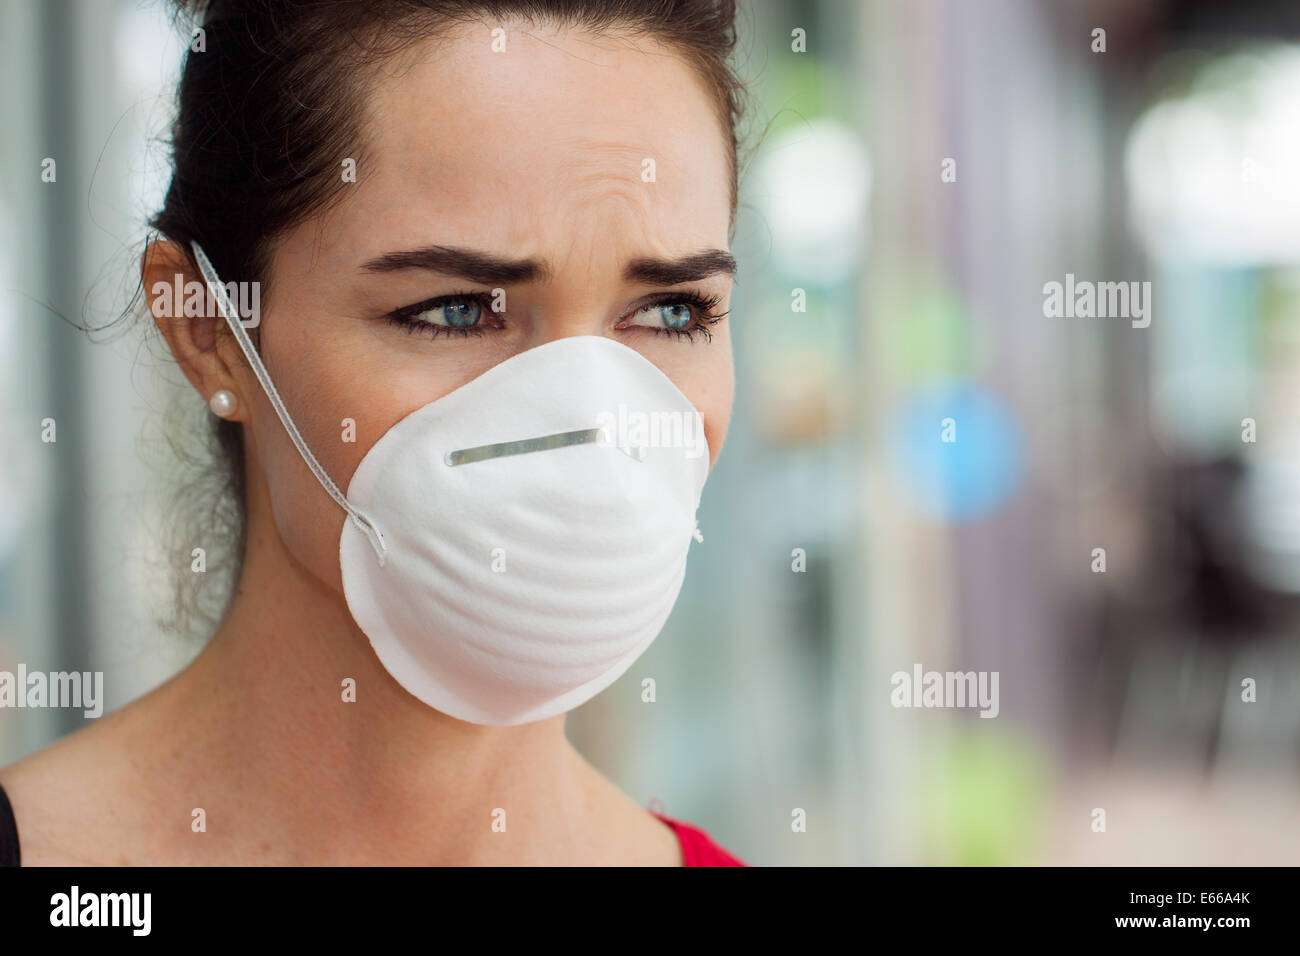 Close-up of a woman in the city wearing a face mask to protect herself from infection or air pollution. Stock Photo